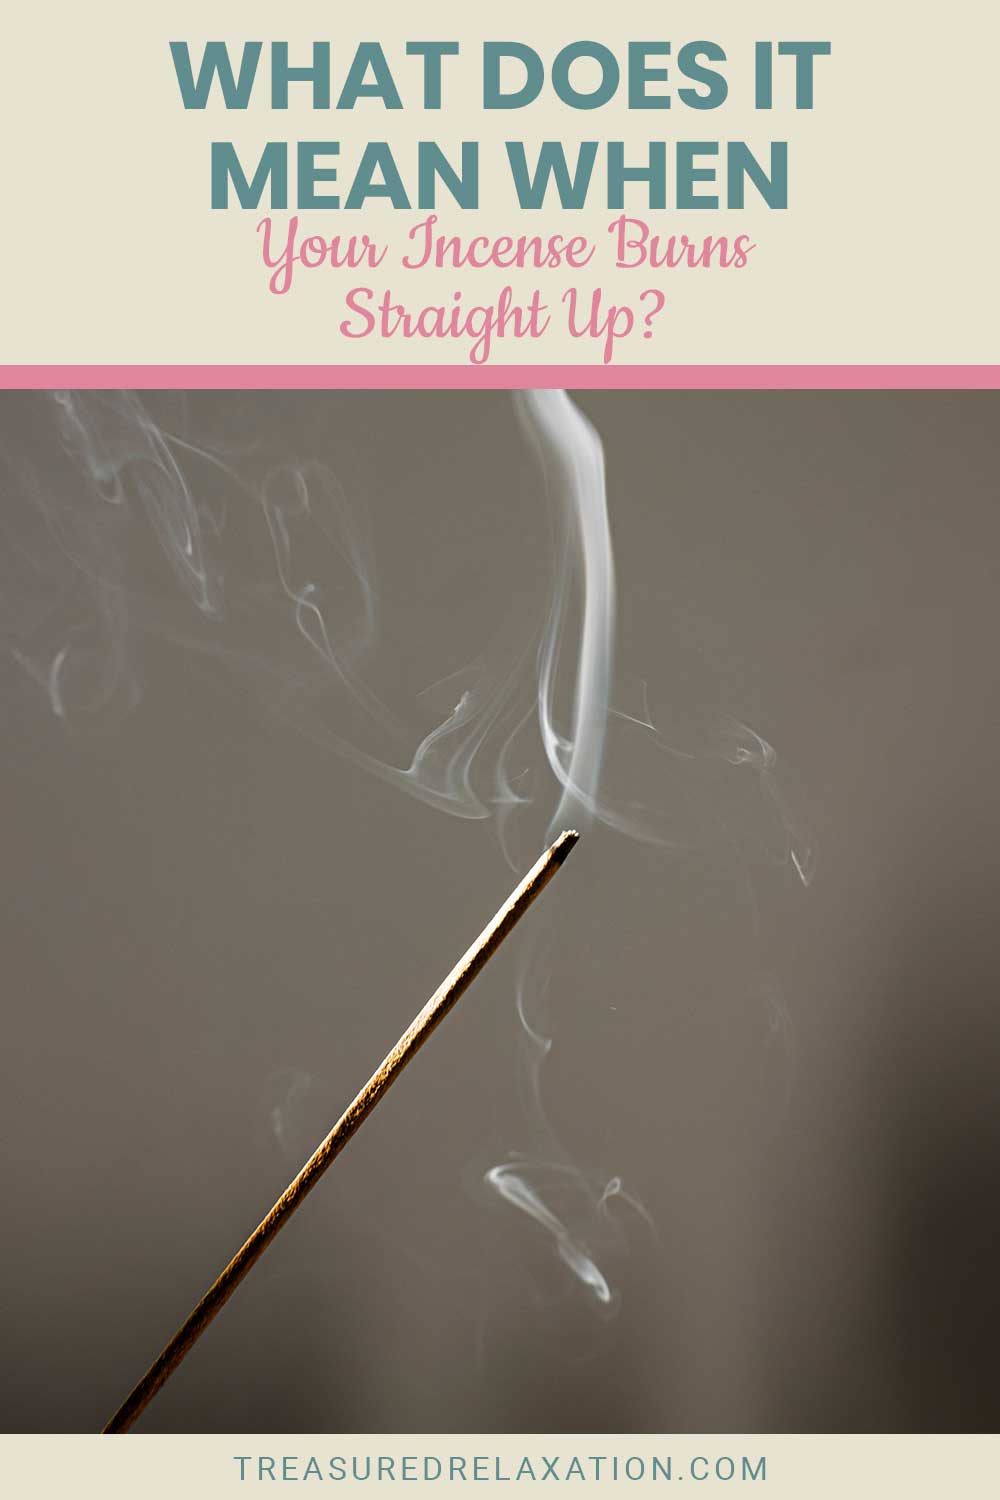 Incense stick burning - What Does It Mean When Your Incense Burns Straight Up?